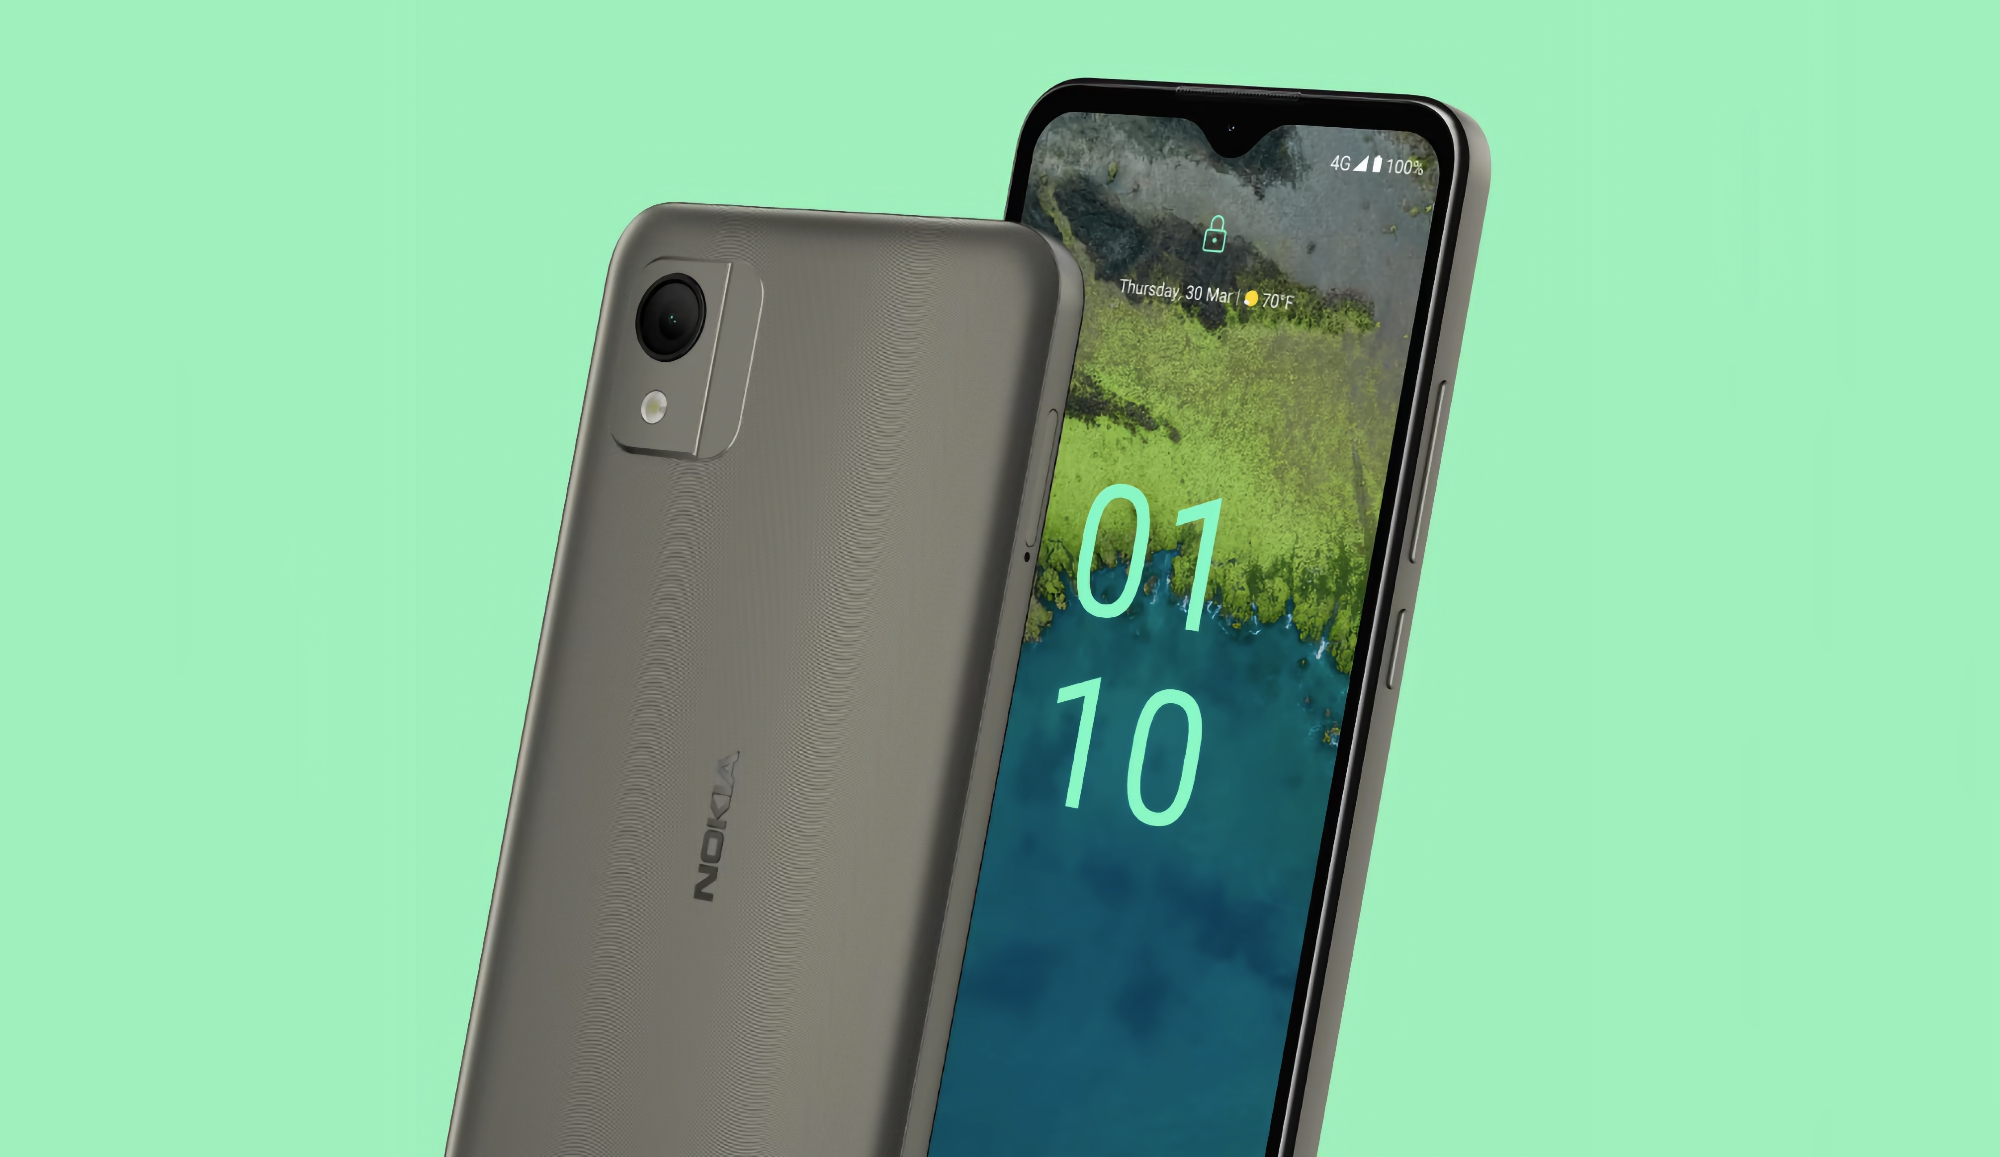 HMD Global unveils Nokia C110: budget smartphone with MediaTek Helio P22 chip, IP52 protection and 3000mAh battery for $99